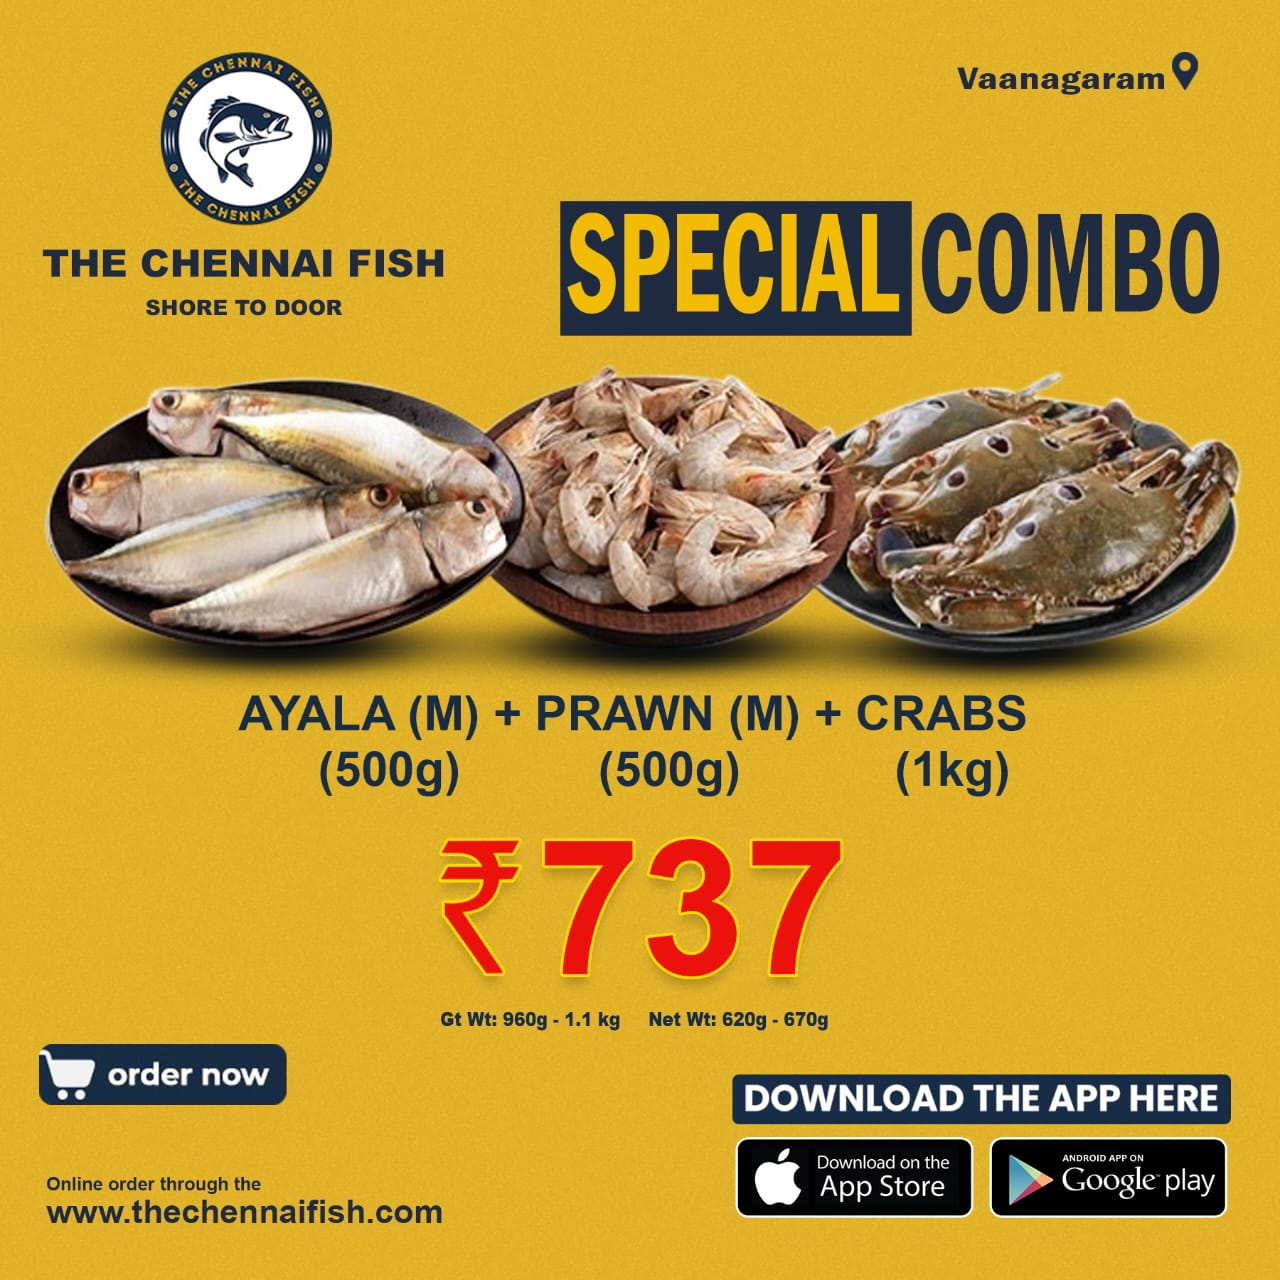 Ayala(1kg) + Prawn(m-500g) + Crabs(1 kg) Delivery only on Saturday & Sunday.